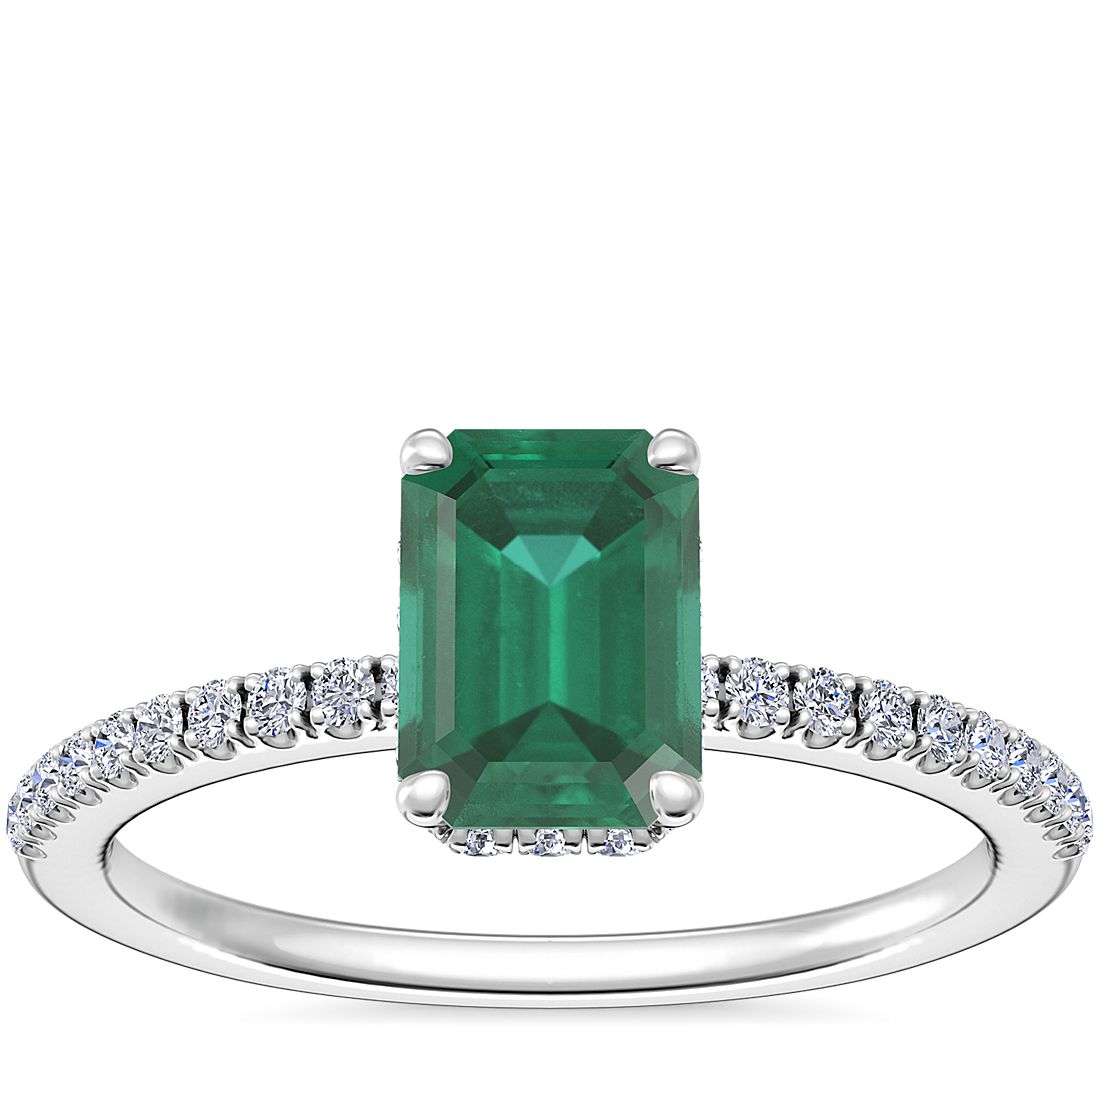 Petite Micropavé Hidden Halo Engagement Ring with Emerald-Cut Emerald in Platinum (7x5mm)